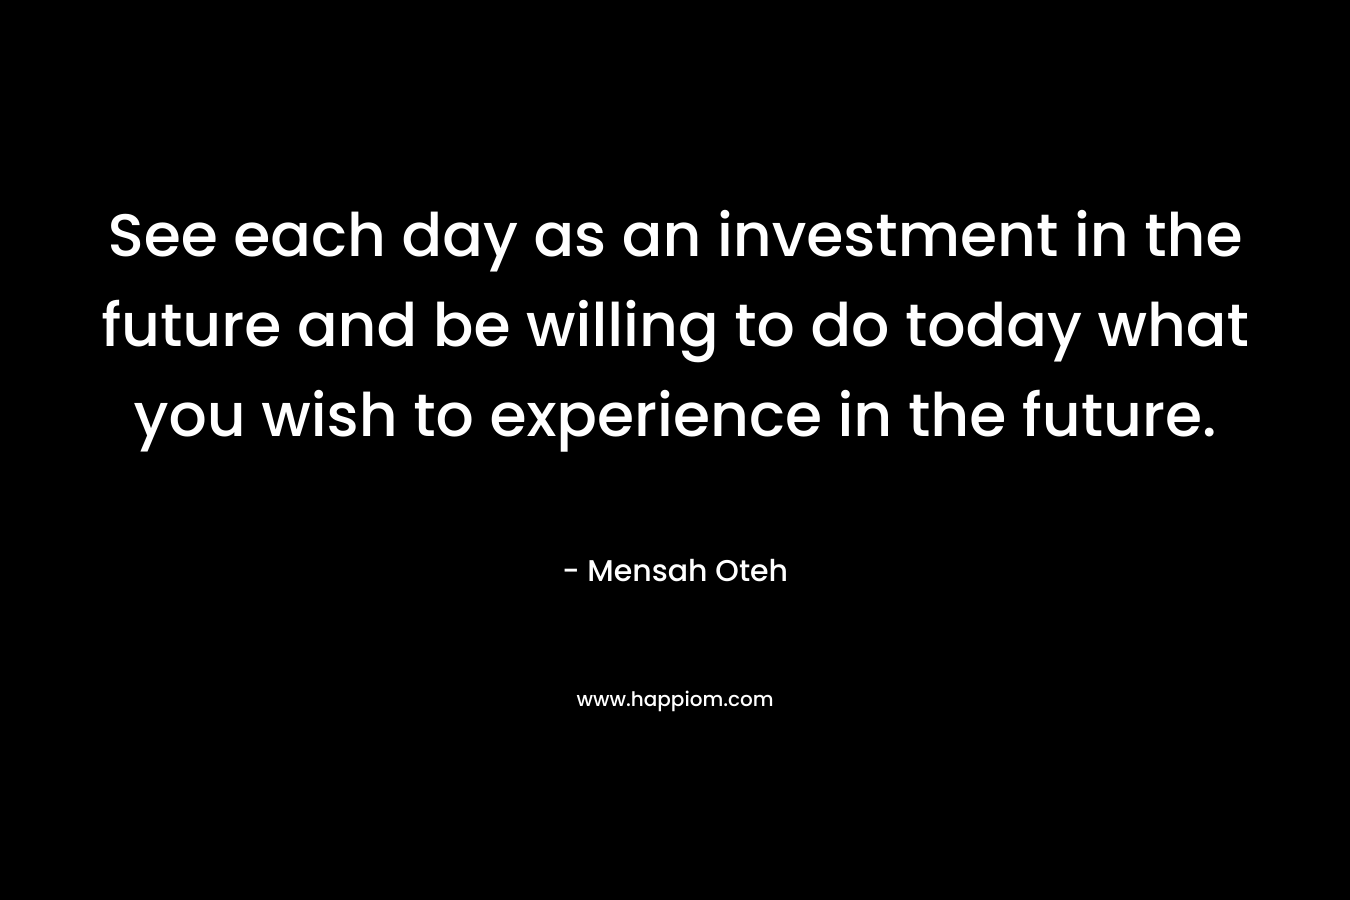 See each day as an investment in the future and be willing to do today what you wish to experience in the future.